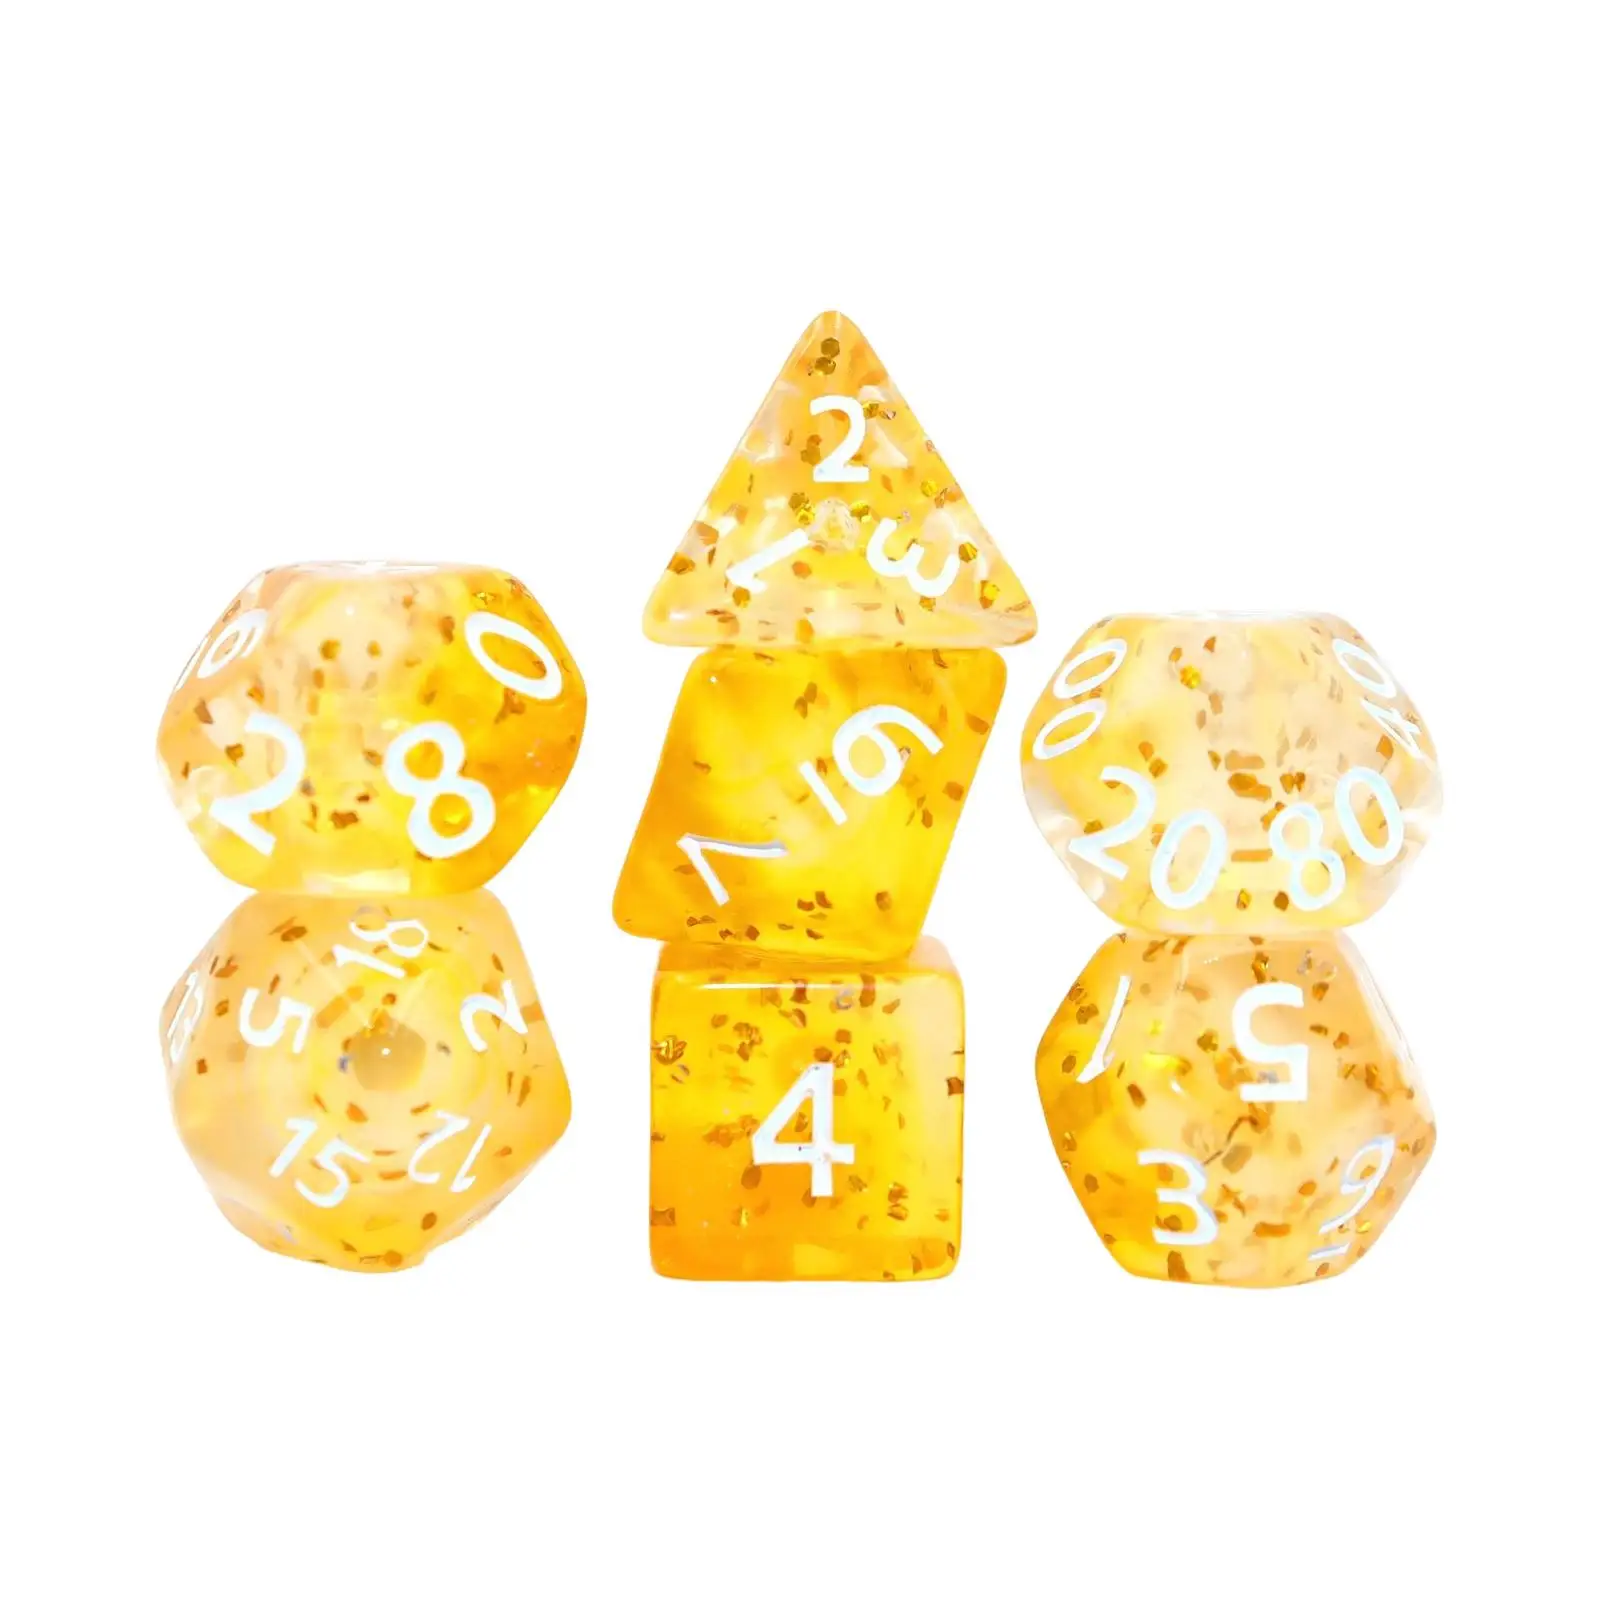 7x Polyhedral Dices Set D4,D6,D8,D10,D12,D20 Acrylic Multi Dices Board Game Accessories for Role Playing Party Favors